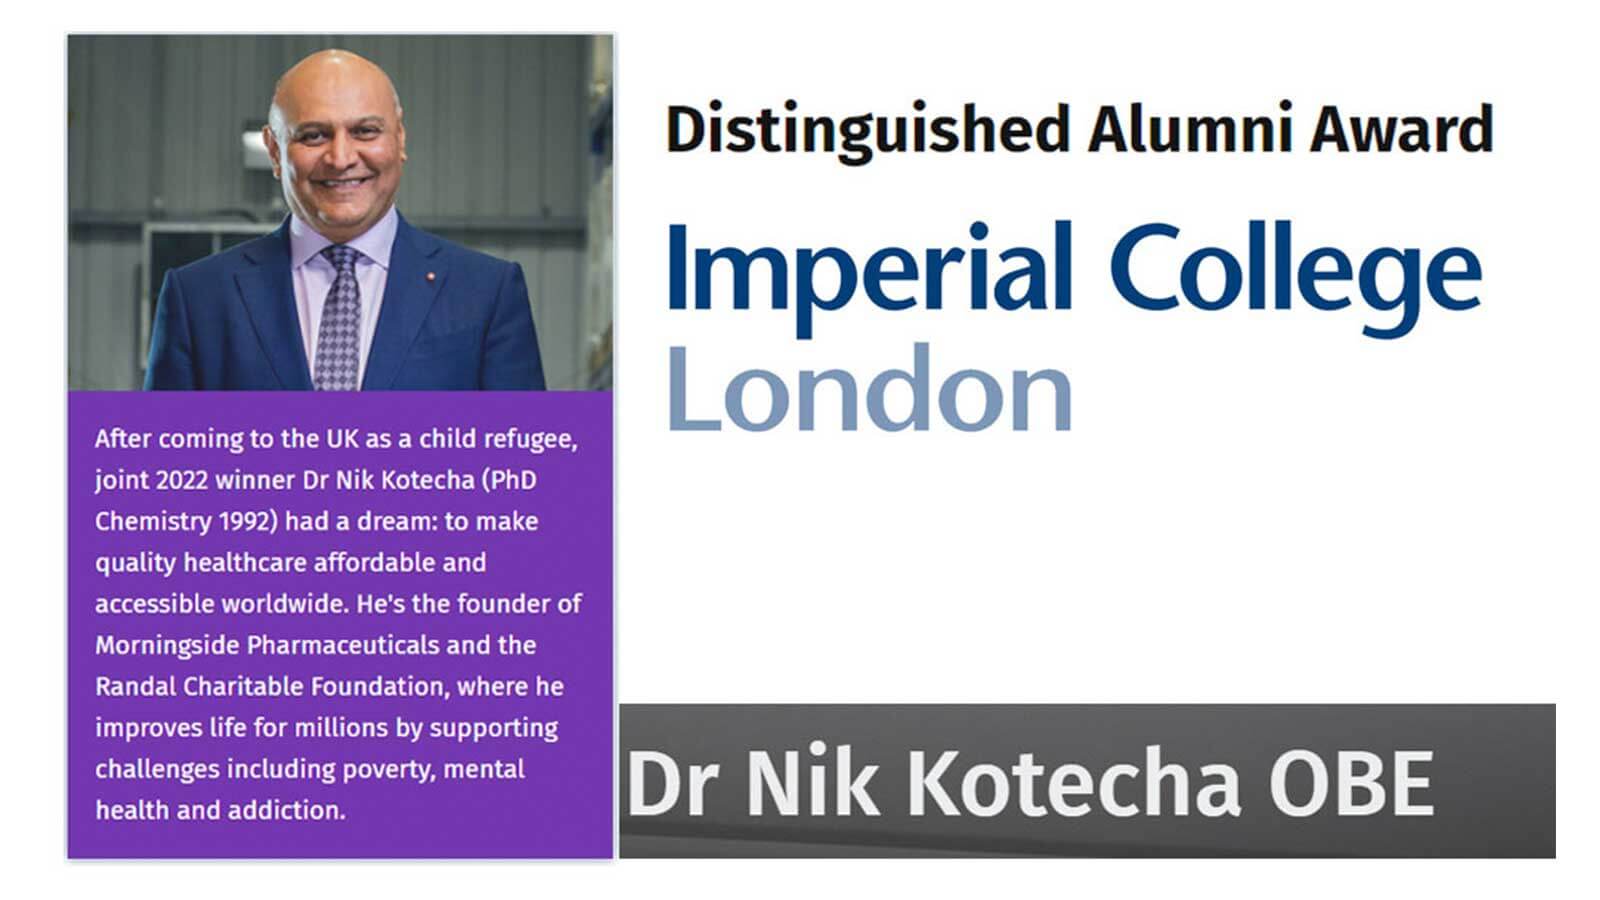 Dr Nik Kotecha OBE, Imperial College London's Distinguished Alumni of the Year 2022